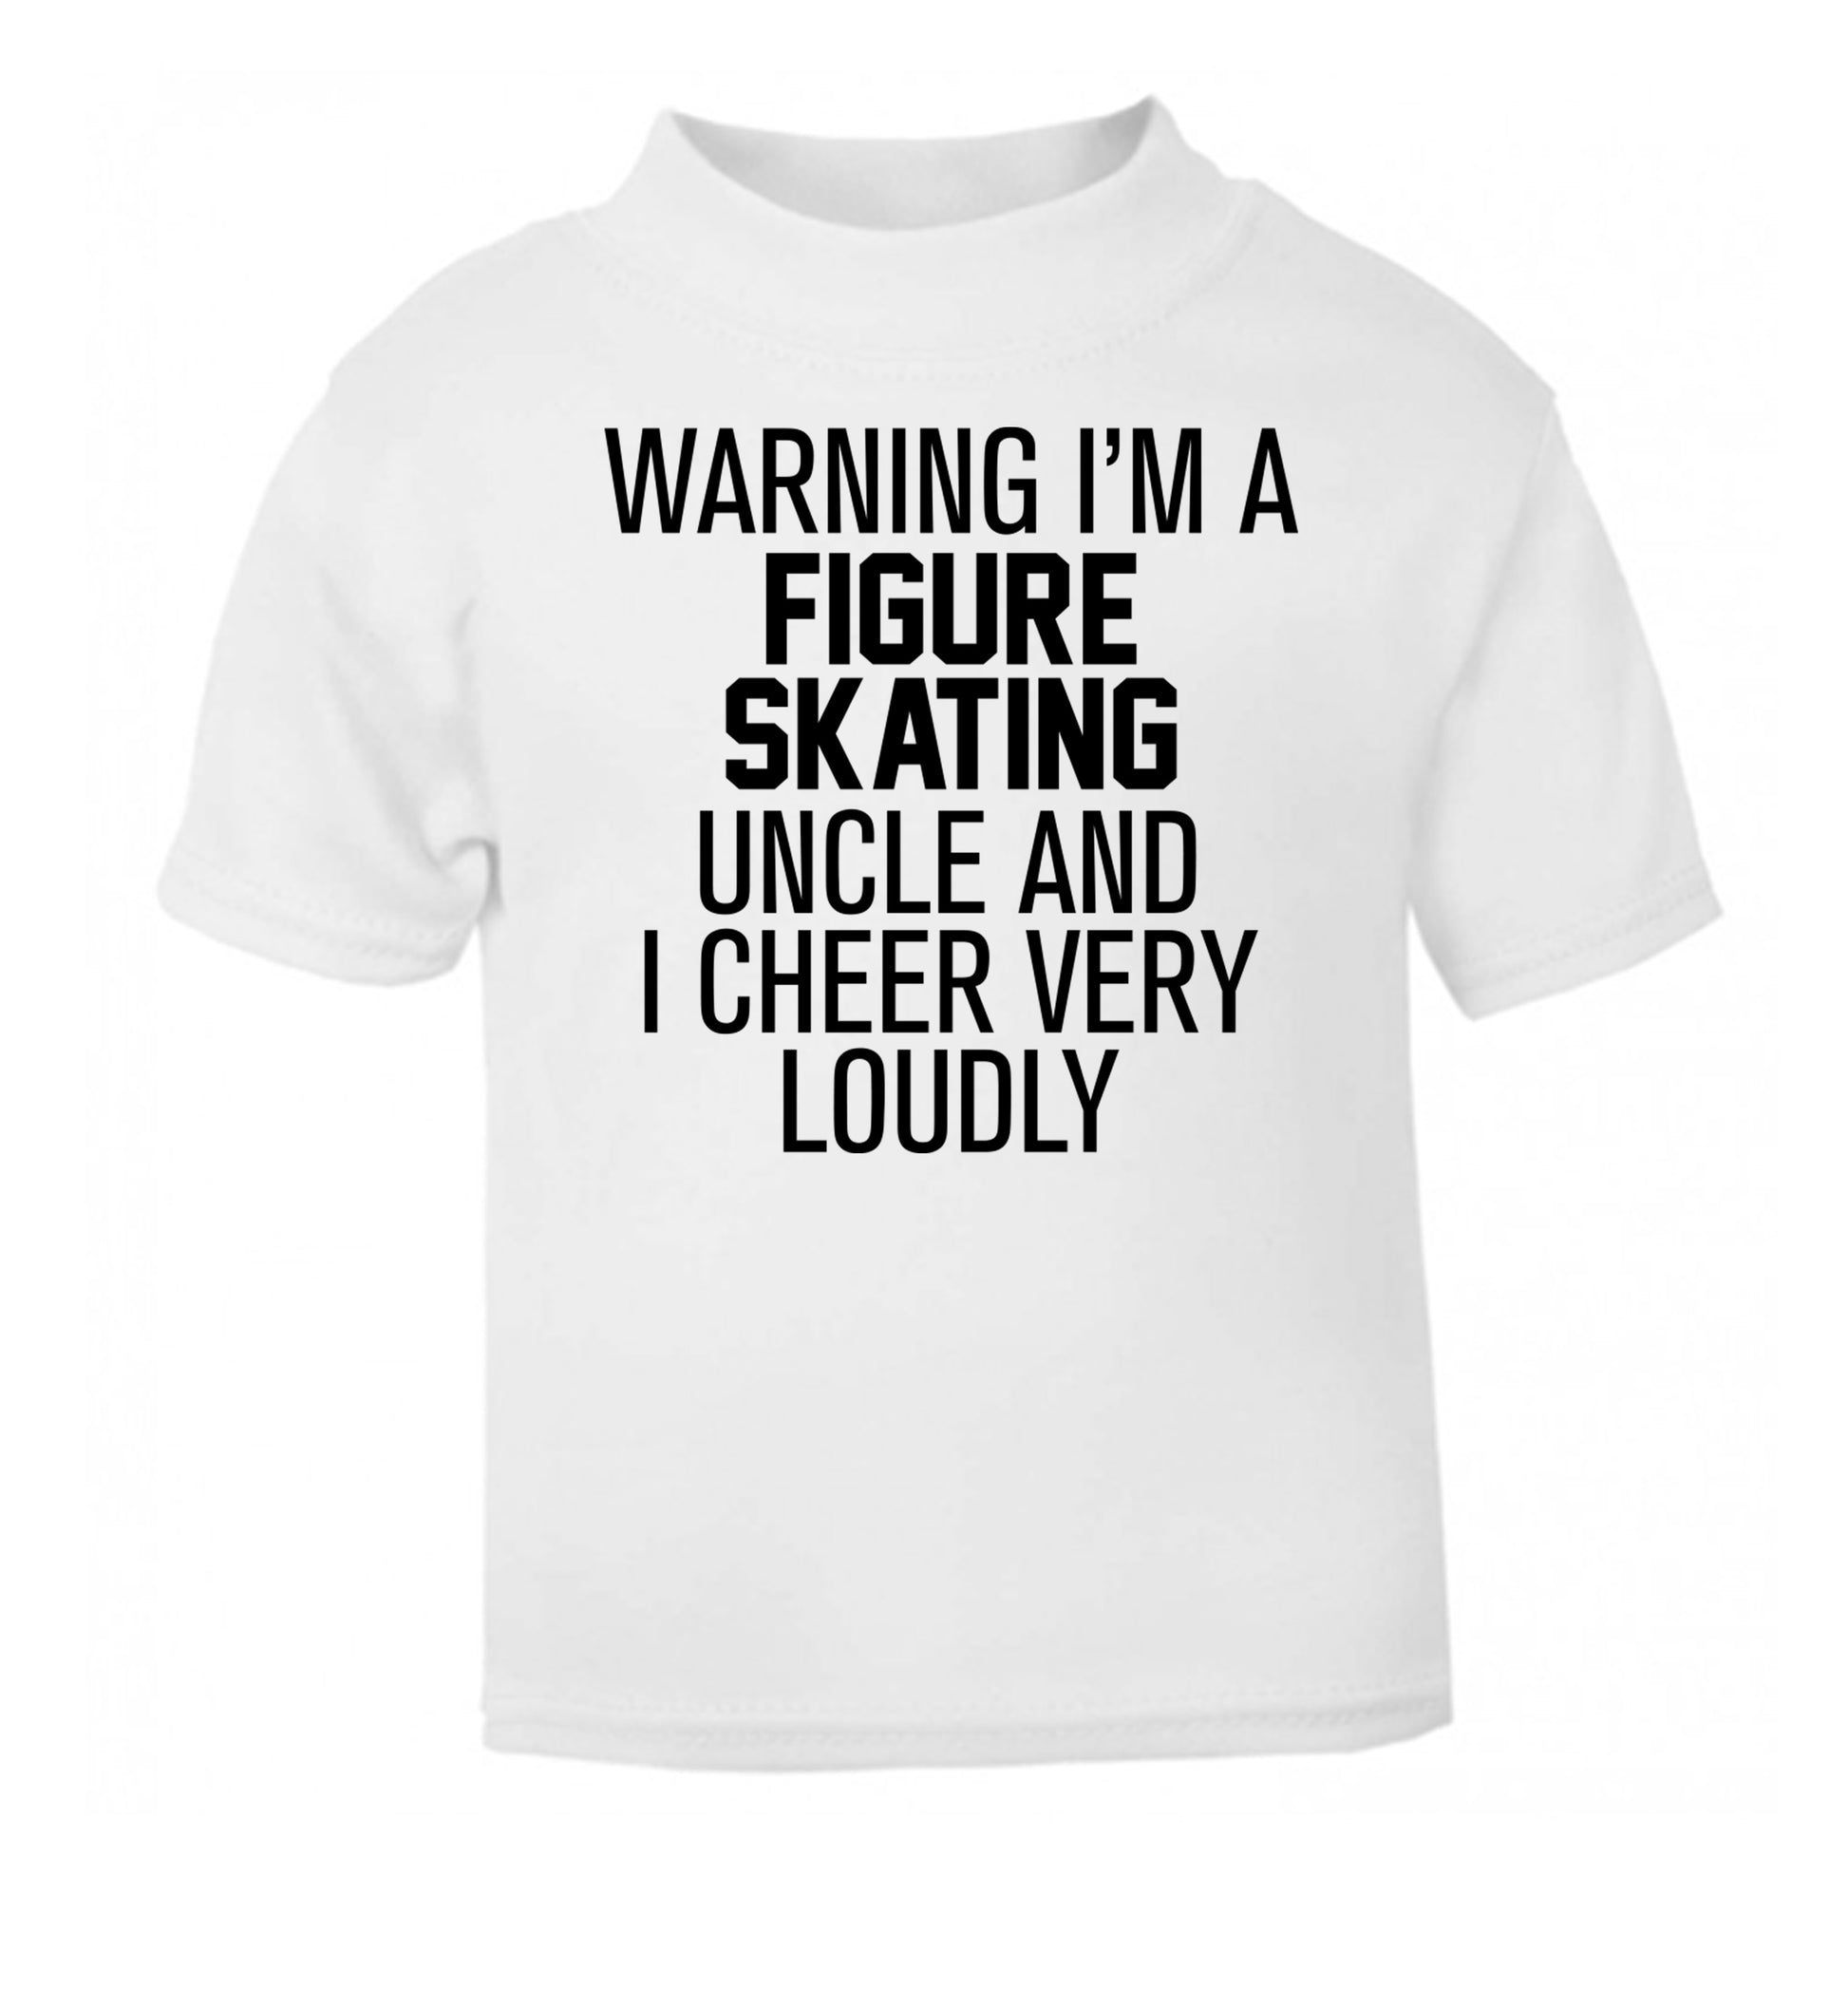 Warning I'm a figure skating uncle and I cheer very loudly white Baby Toddler Tshirt 2 Years